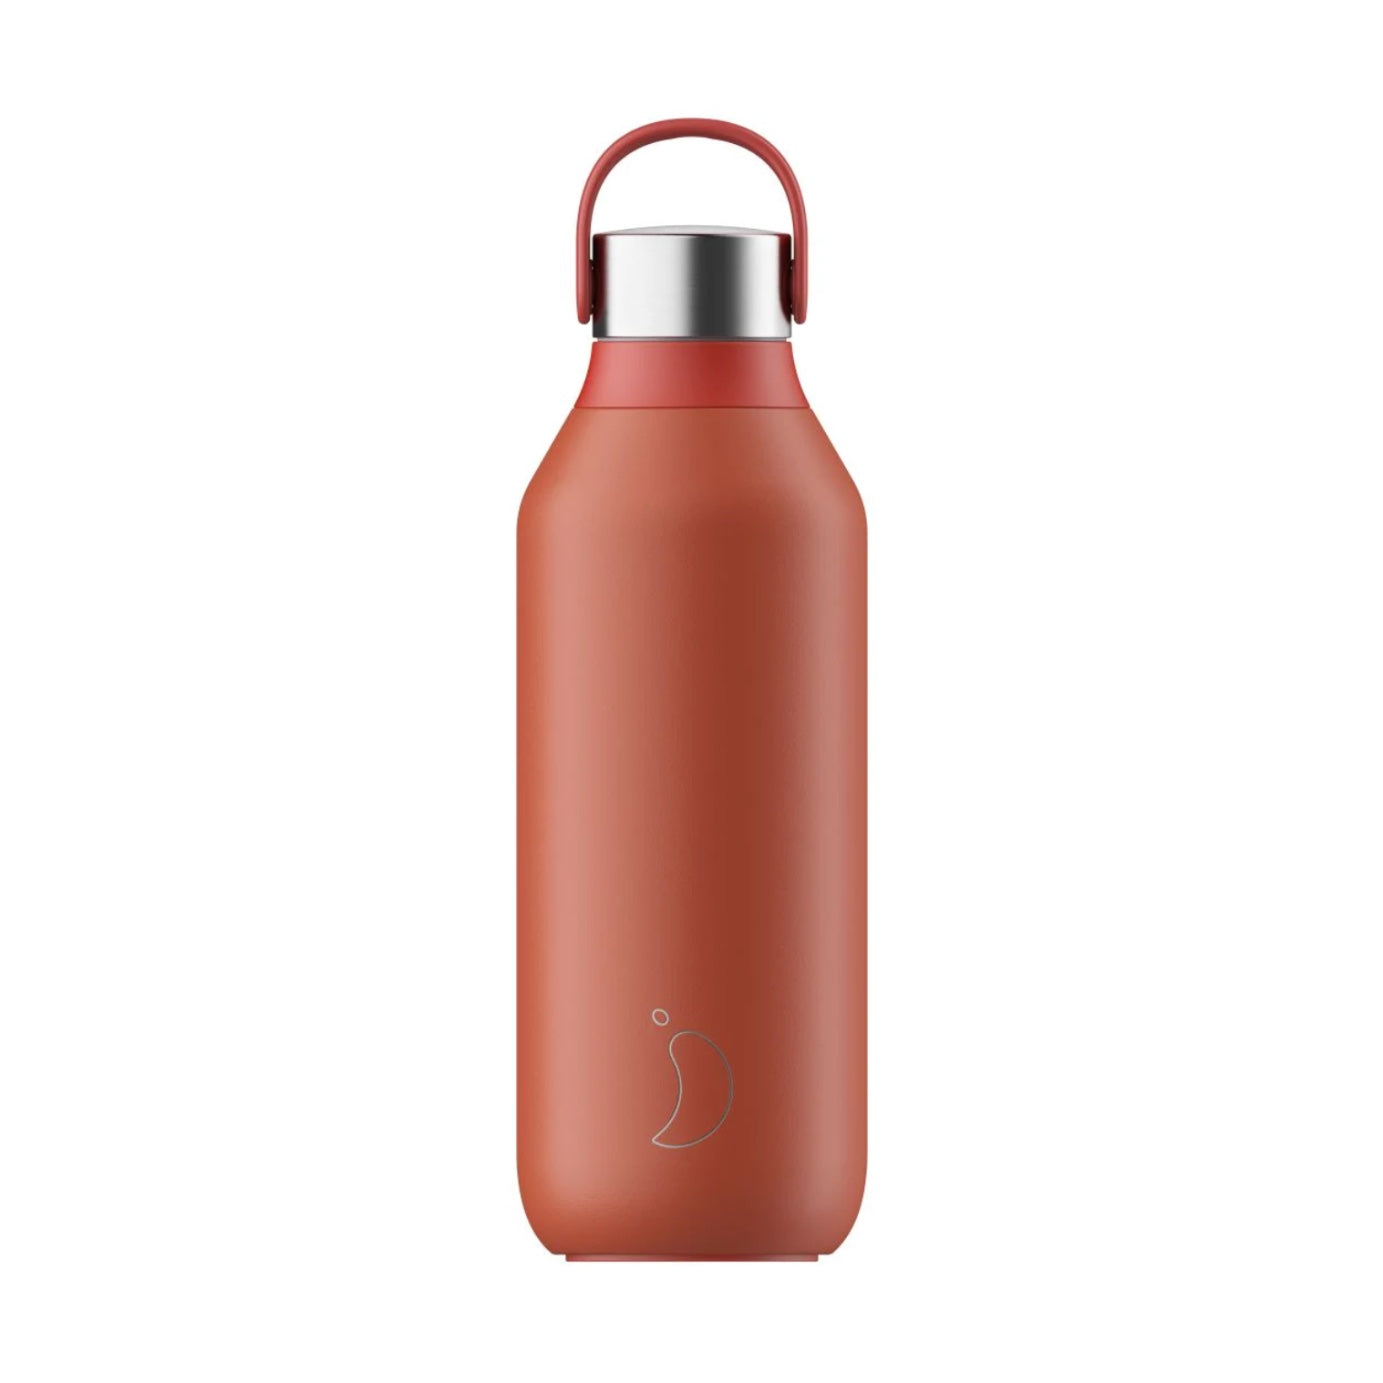 Chillys Series 2 Bottle - 500ml Maple Red